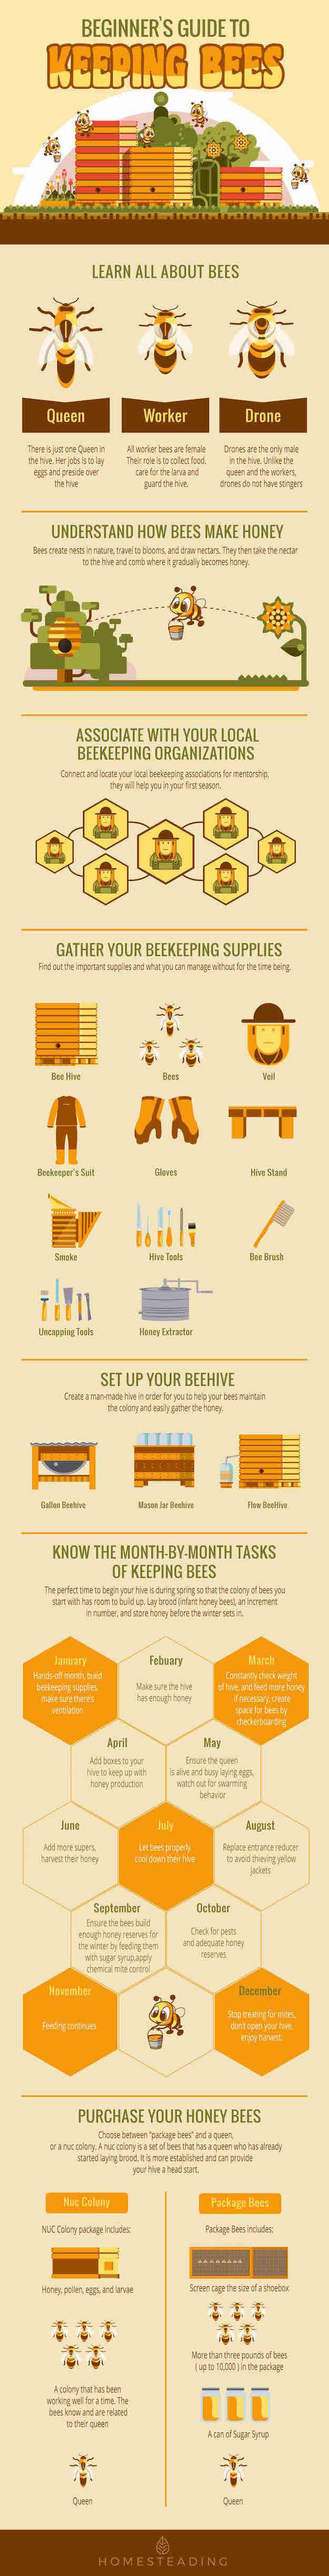 Beginners Guide To Keeping Bees